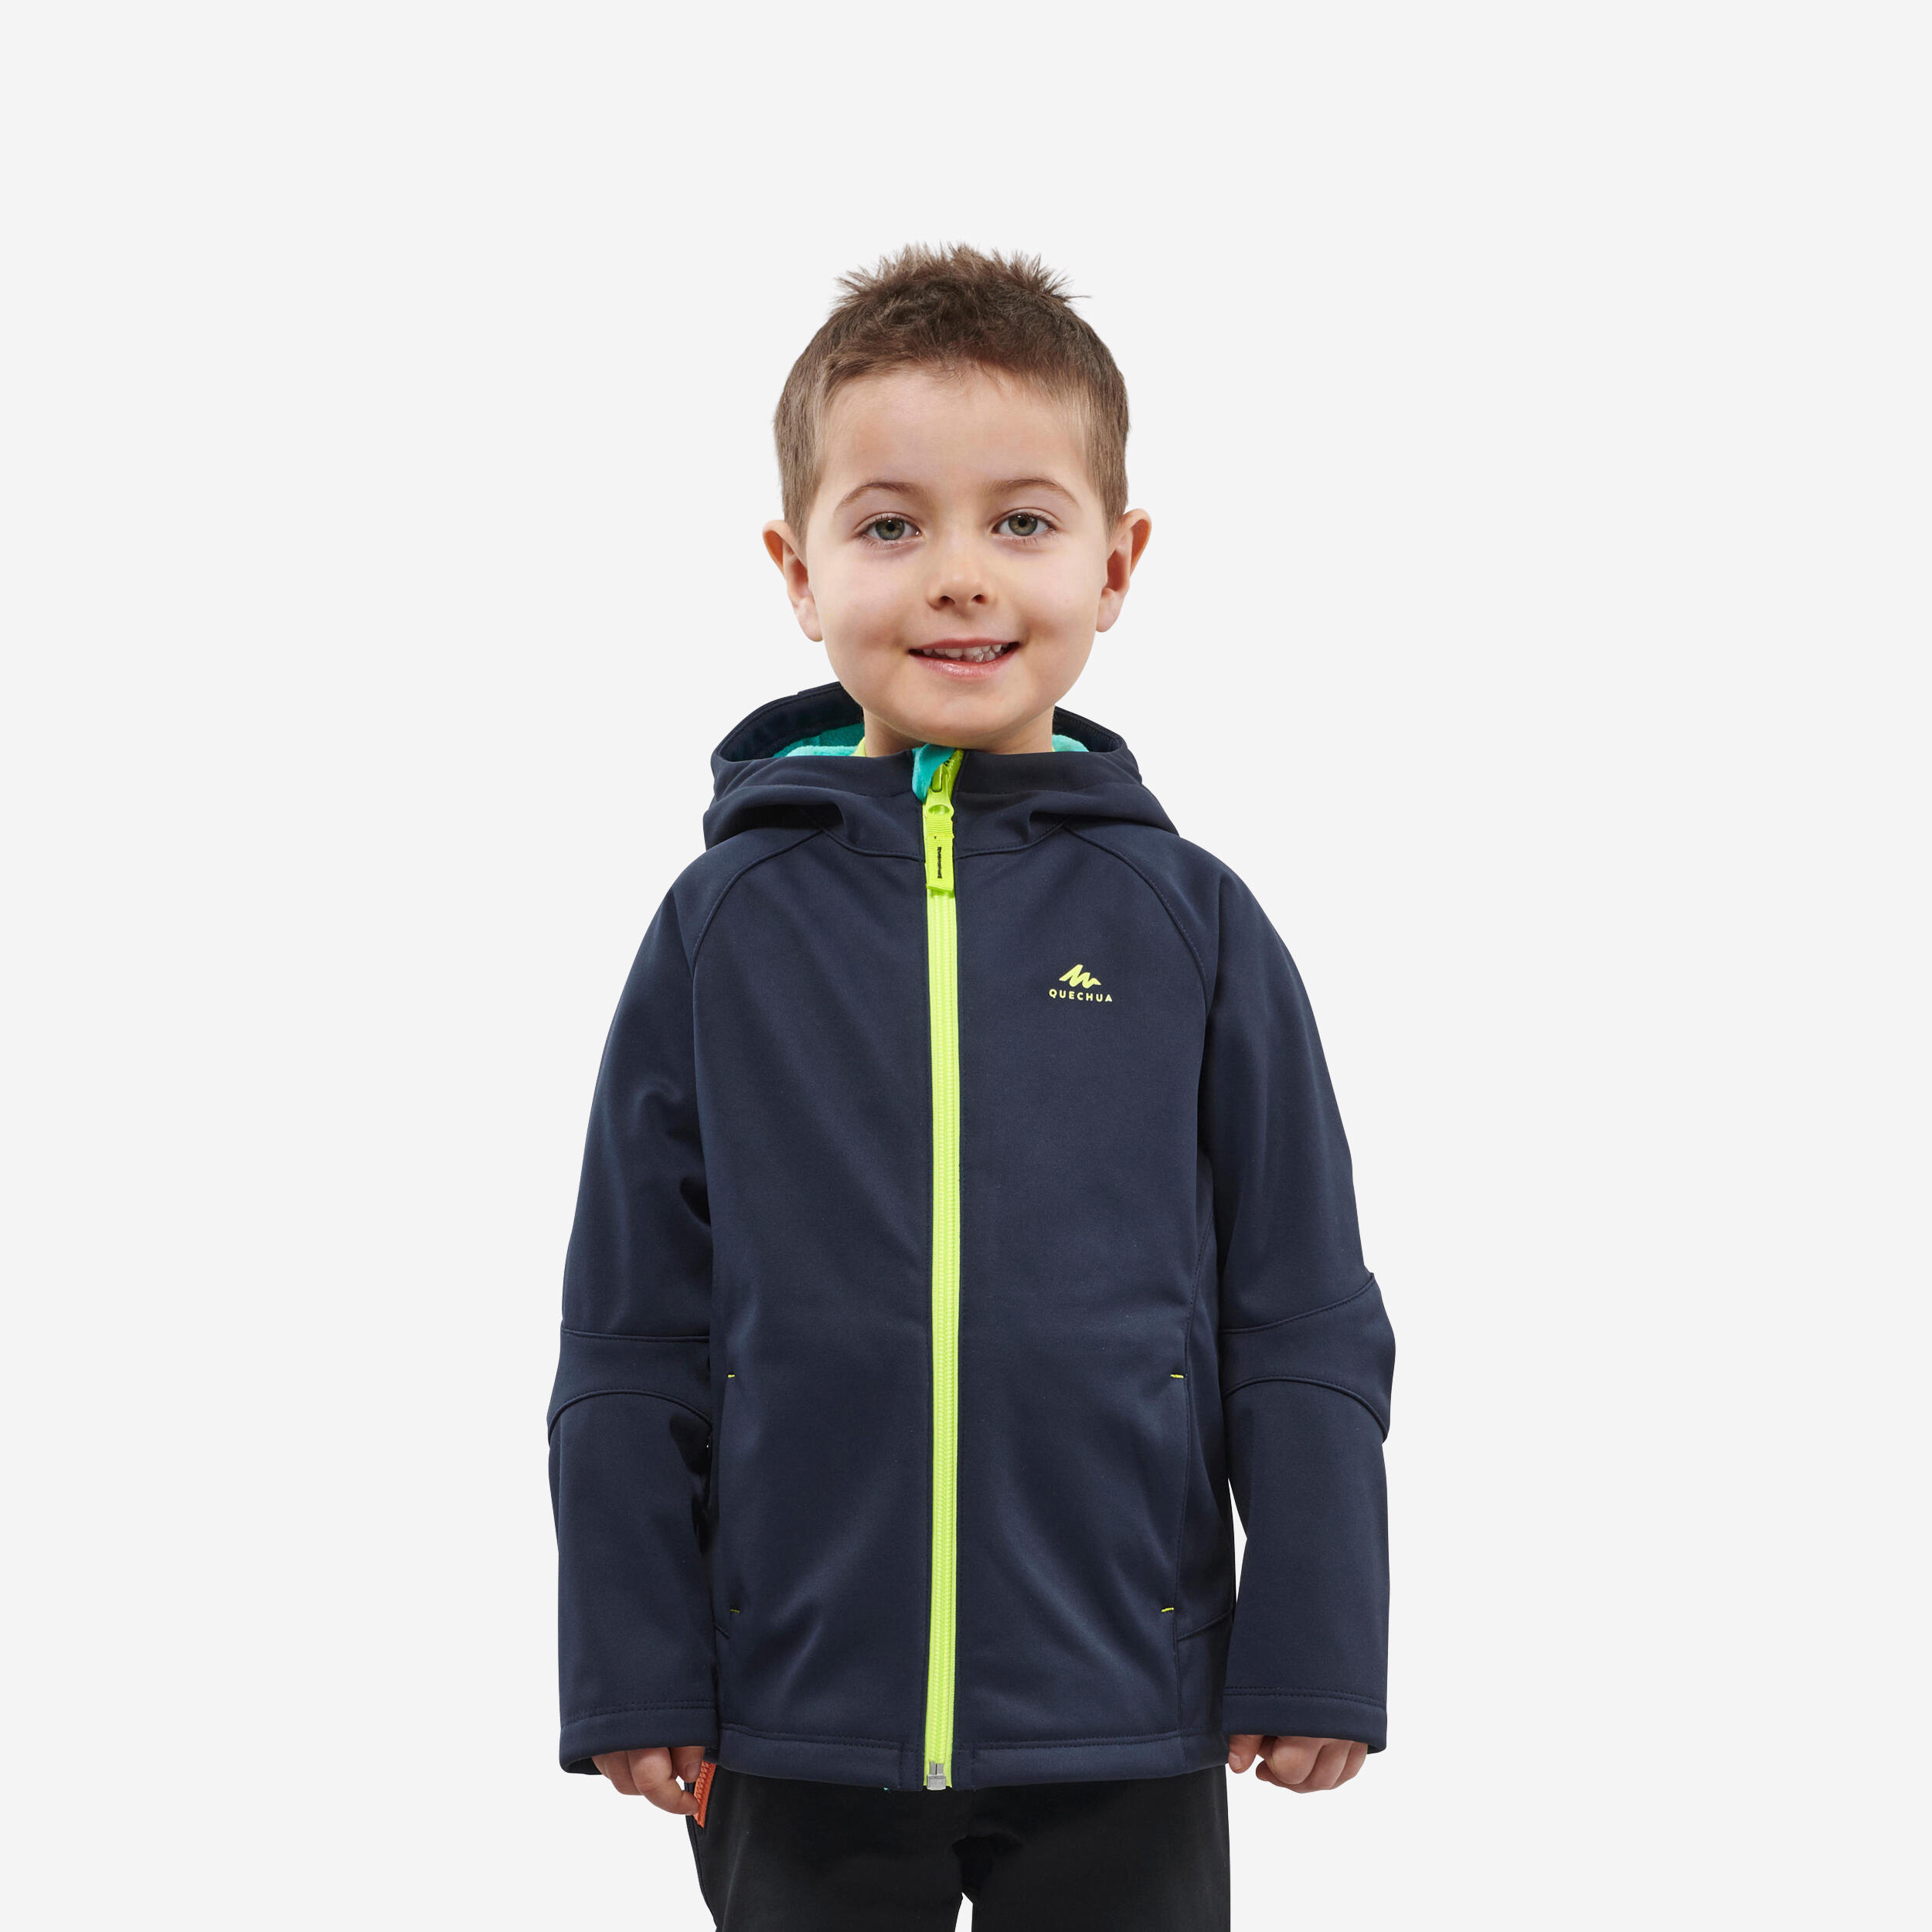 Quechua Softshell Hiking Jacket - MH550 Navy 2-6 Years